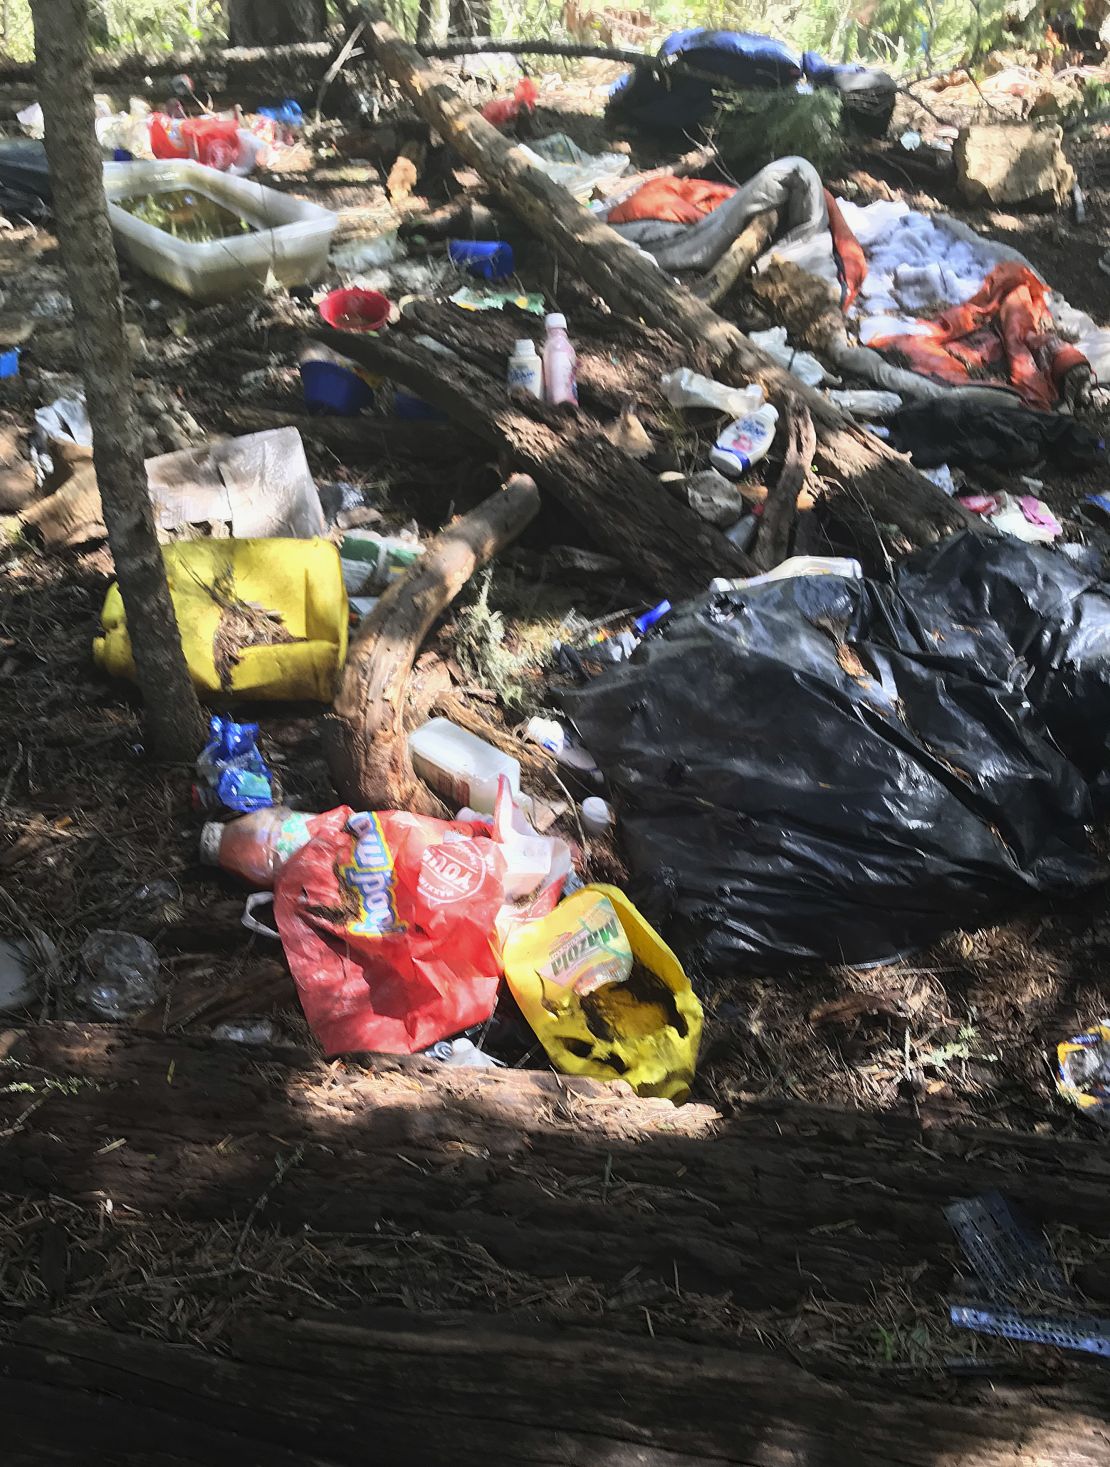 This photo provided by the US Attorney's Office shows trash found at an illegal marijuana site near Hayfork, California.